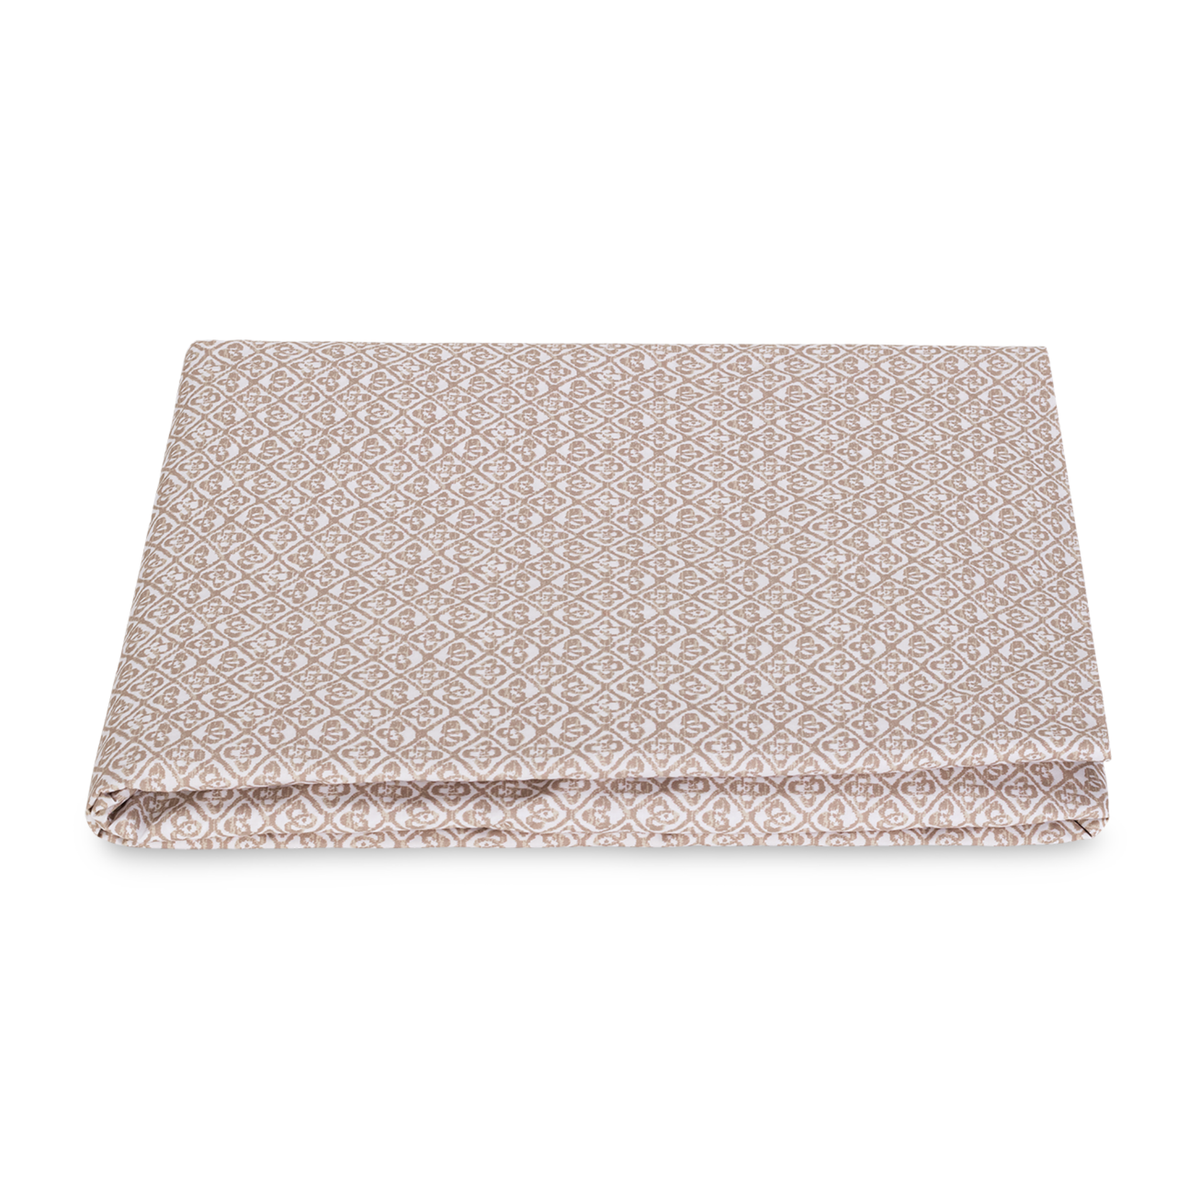 Folded Fitted Sheet of Matouk Schumacher Catarina Bedding in Dune Color